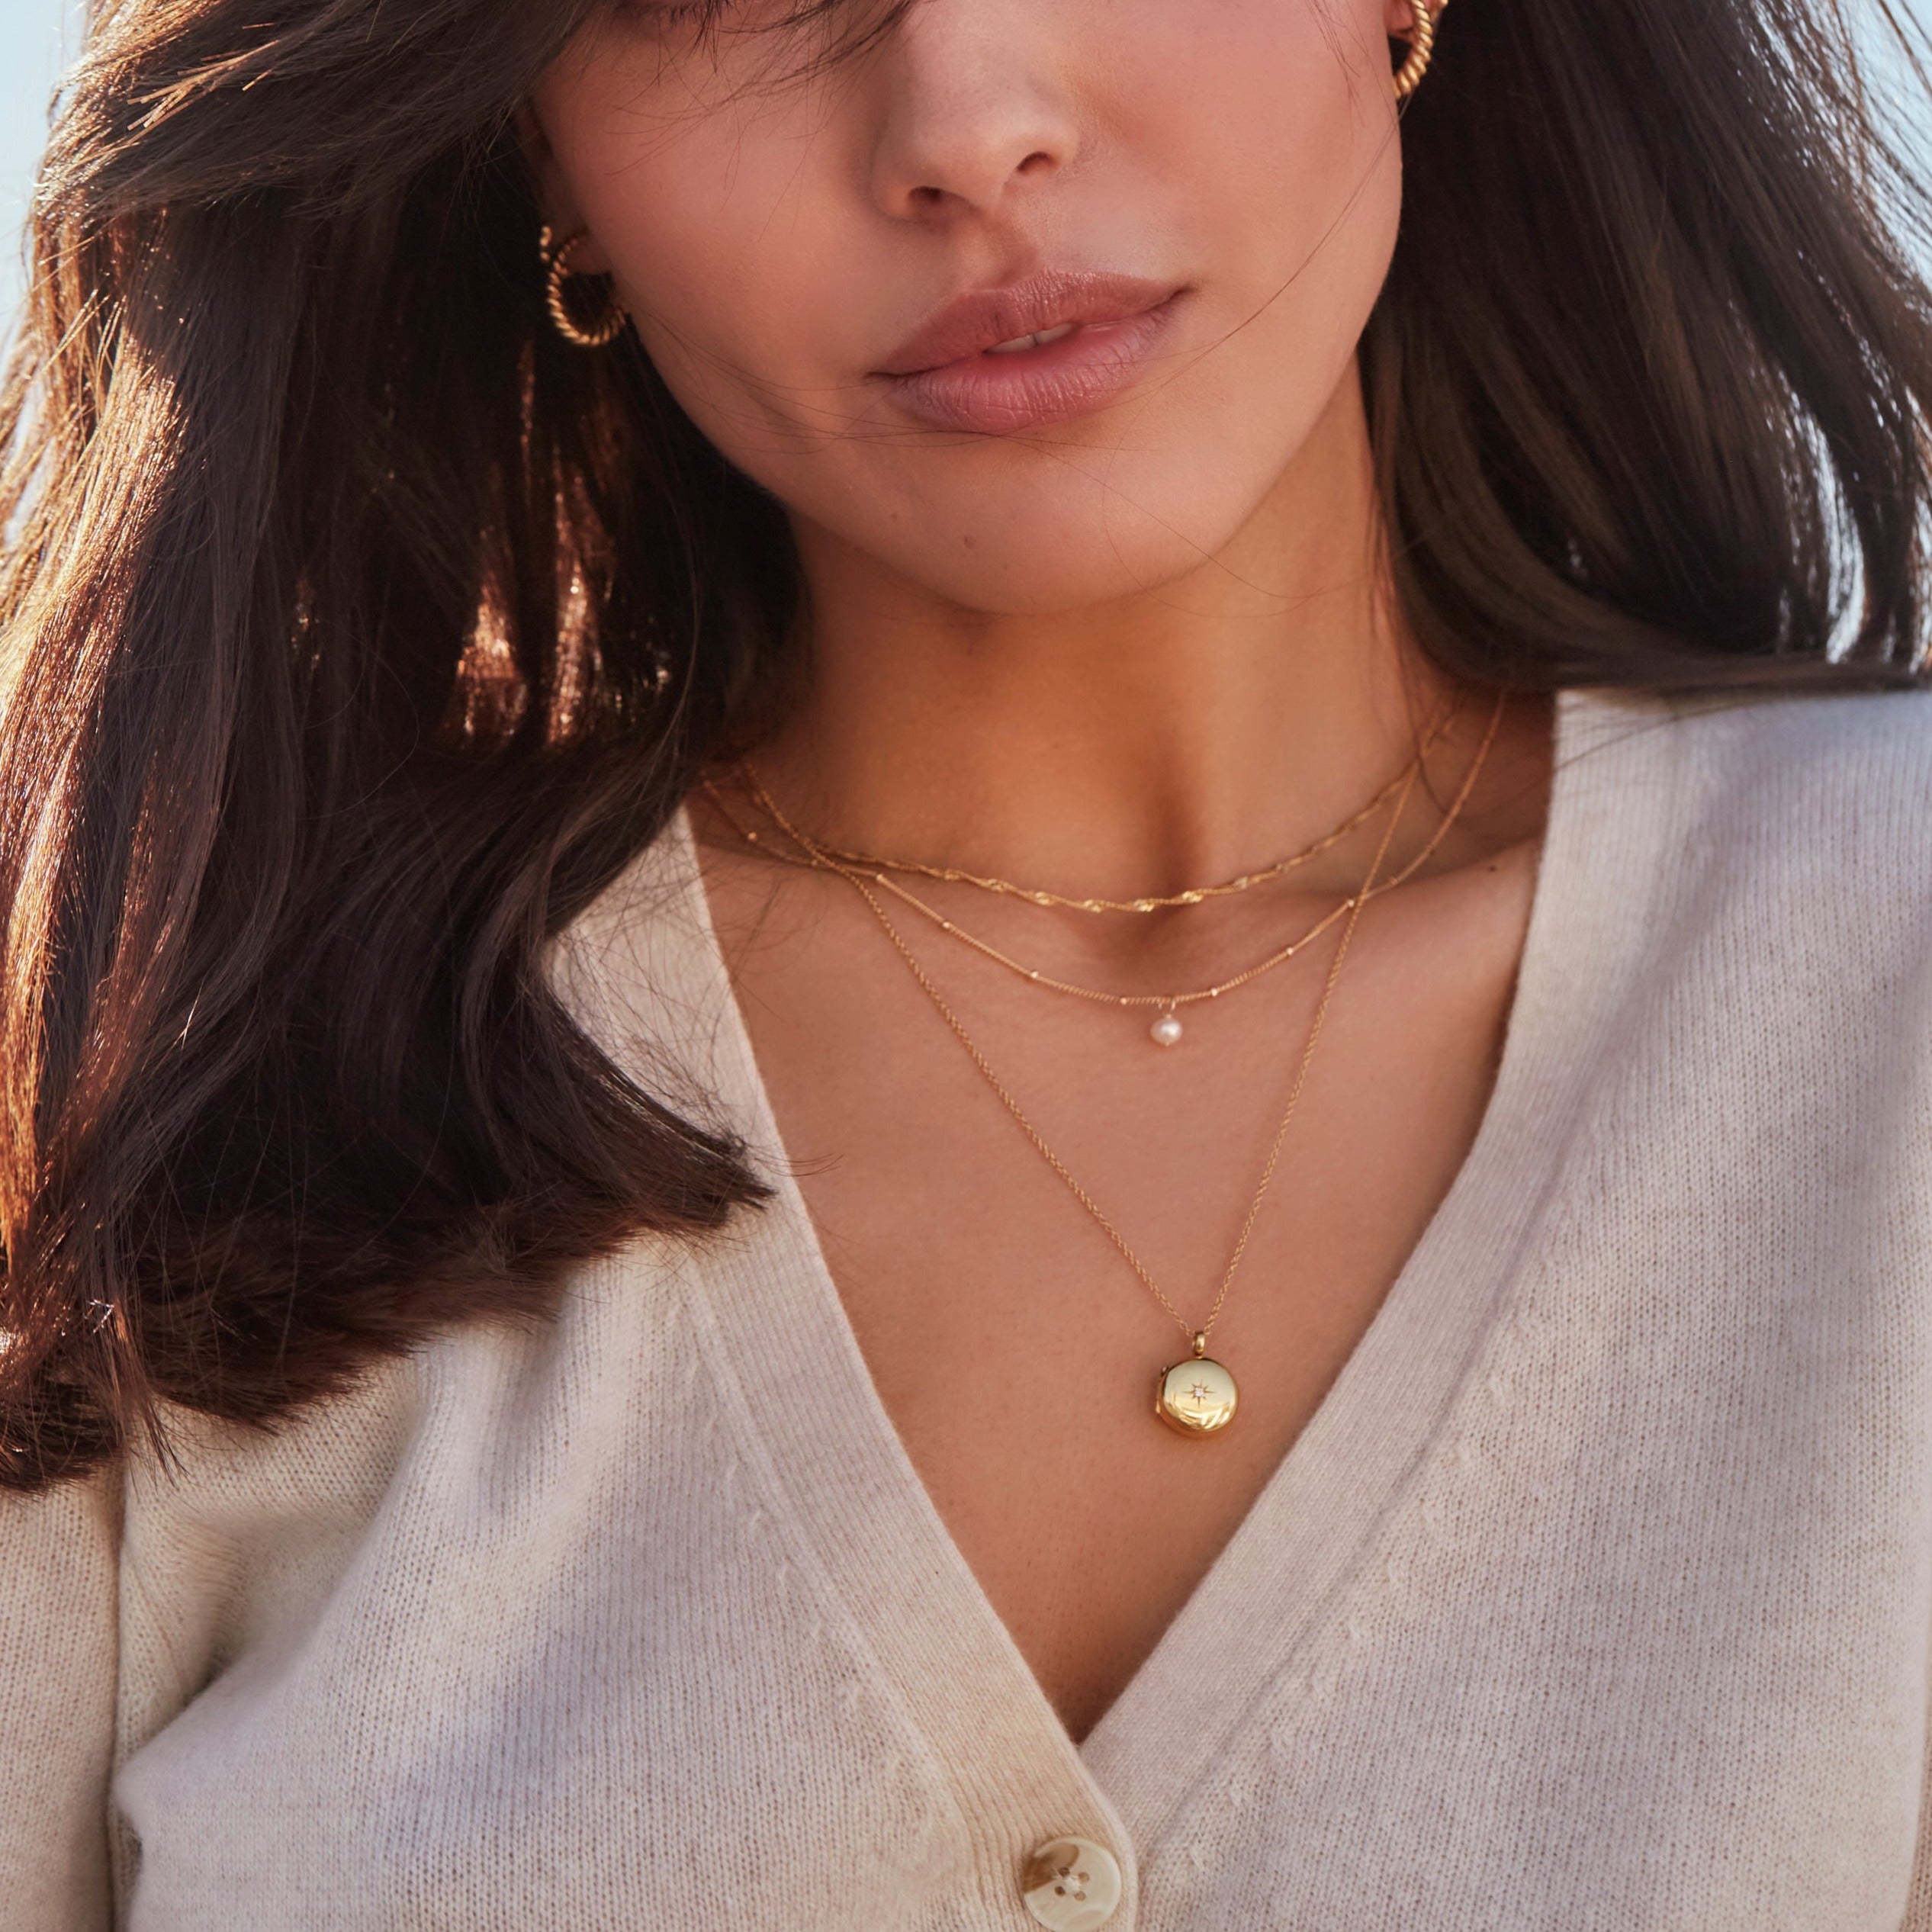 Woman wearing a gold small round diamond locket necklace, a gold twisted rope chain necklace and a gold single pearl satellite necklace around her neck with a beige jumper